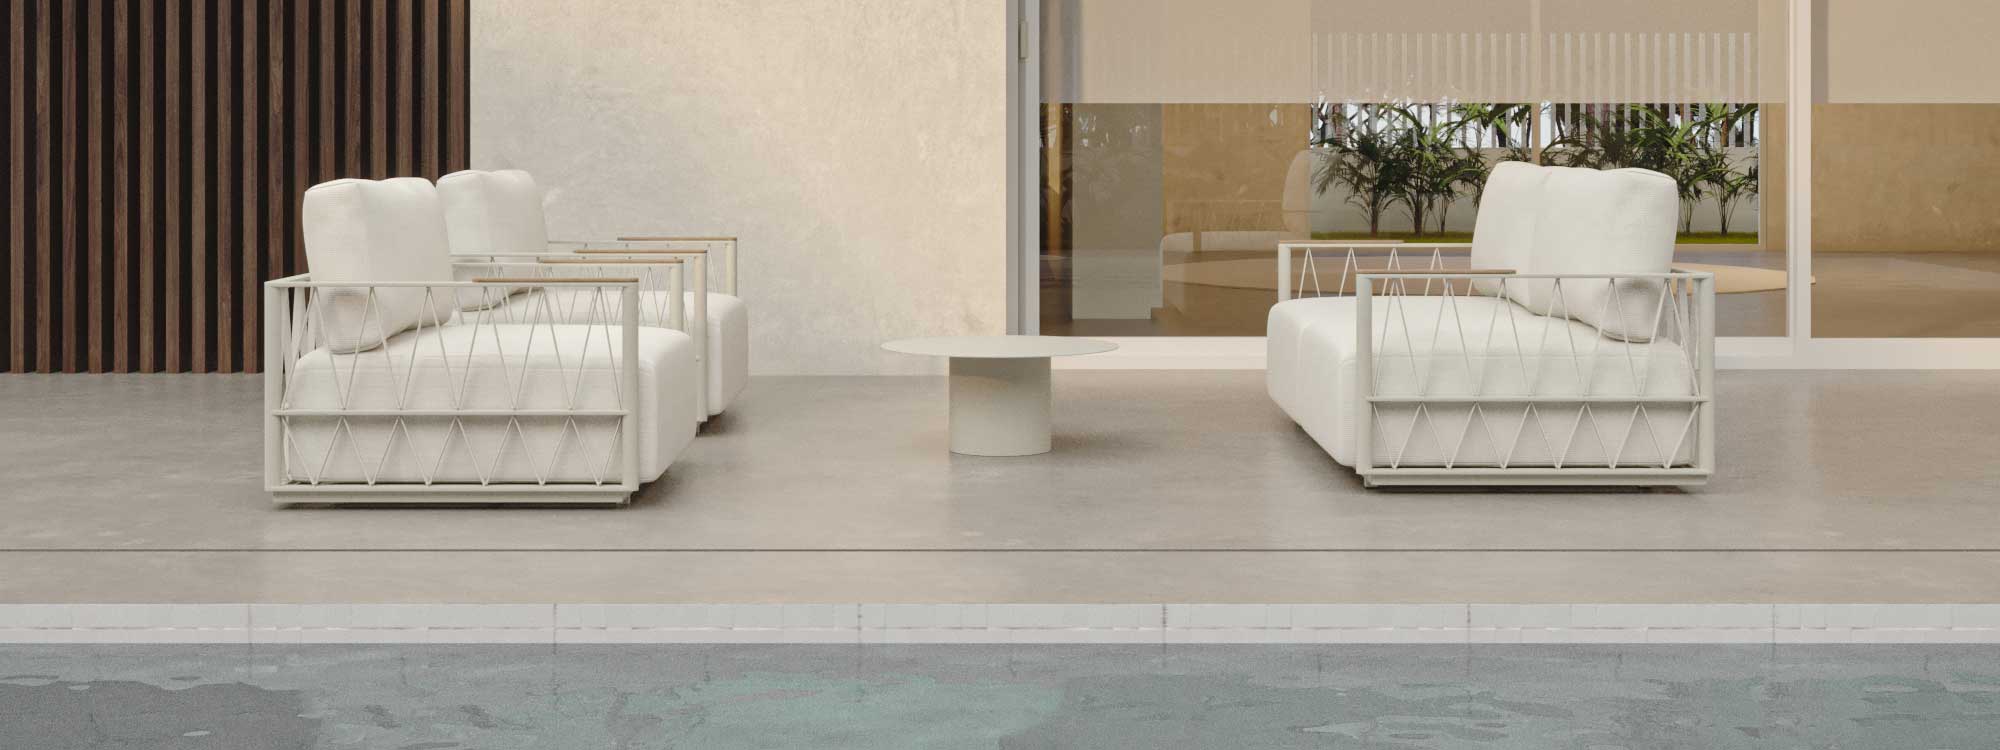 Image of Ava white sofa and lounge chairs by Oiside on sleek outdoor terrace